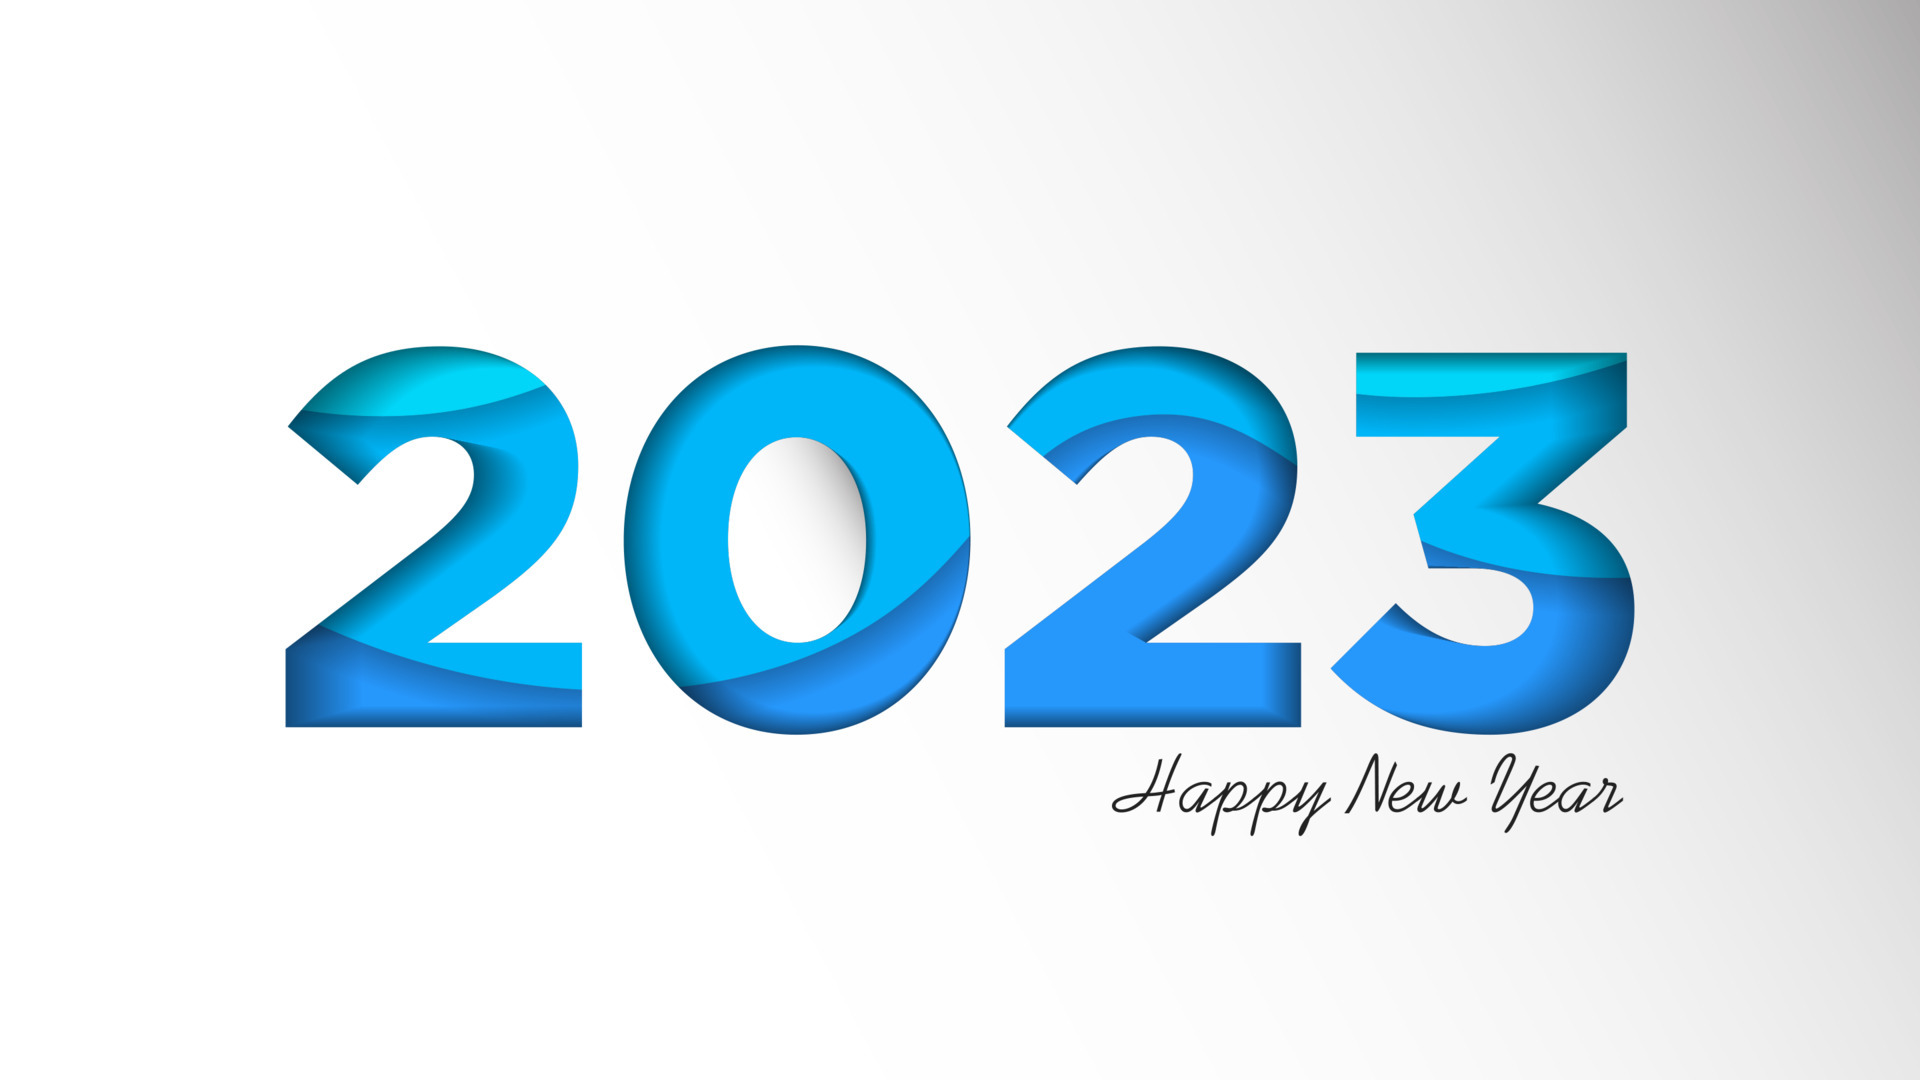 Happy New Year 2023 Background. Holiday Vector Illustration of Paper Cut Numbers 2023. 2023 Paper Cut Background Festive Poster or Banner Design